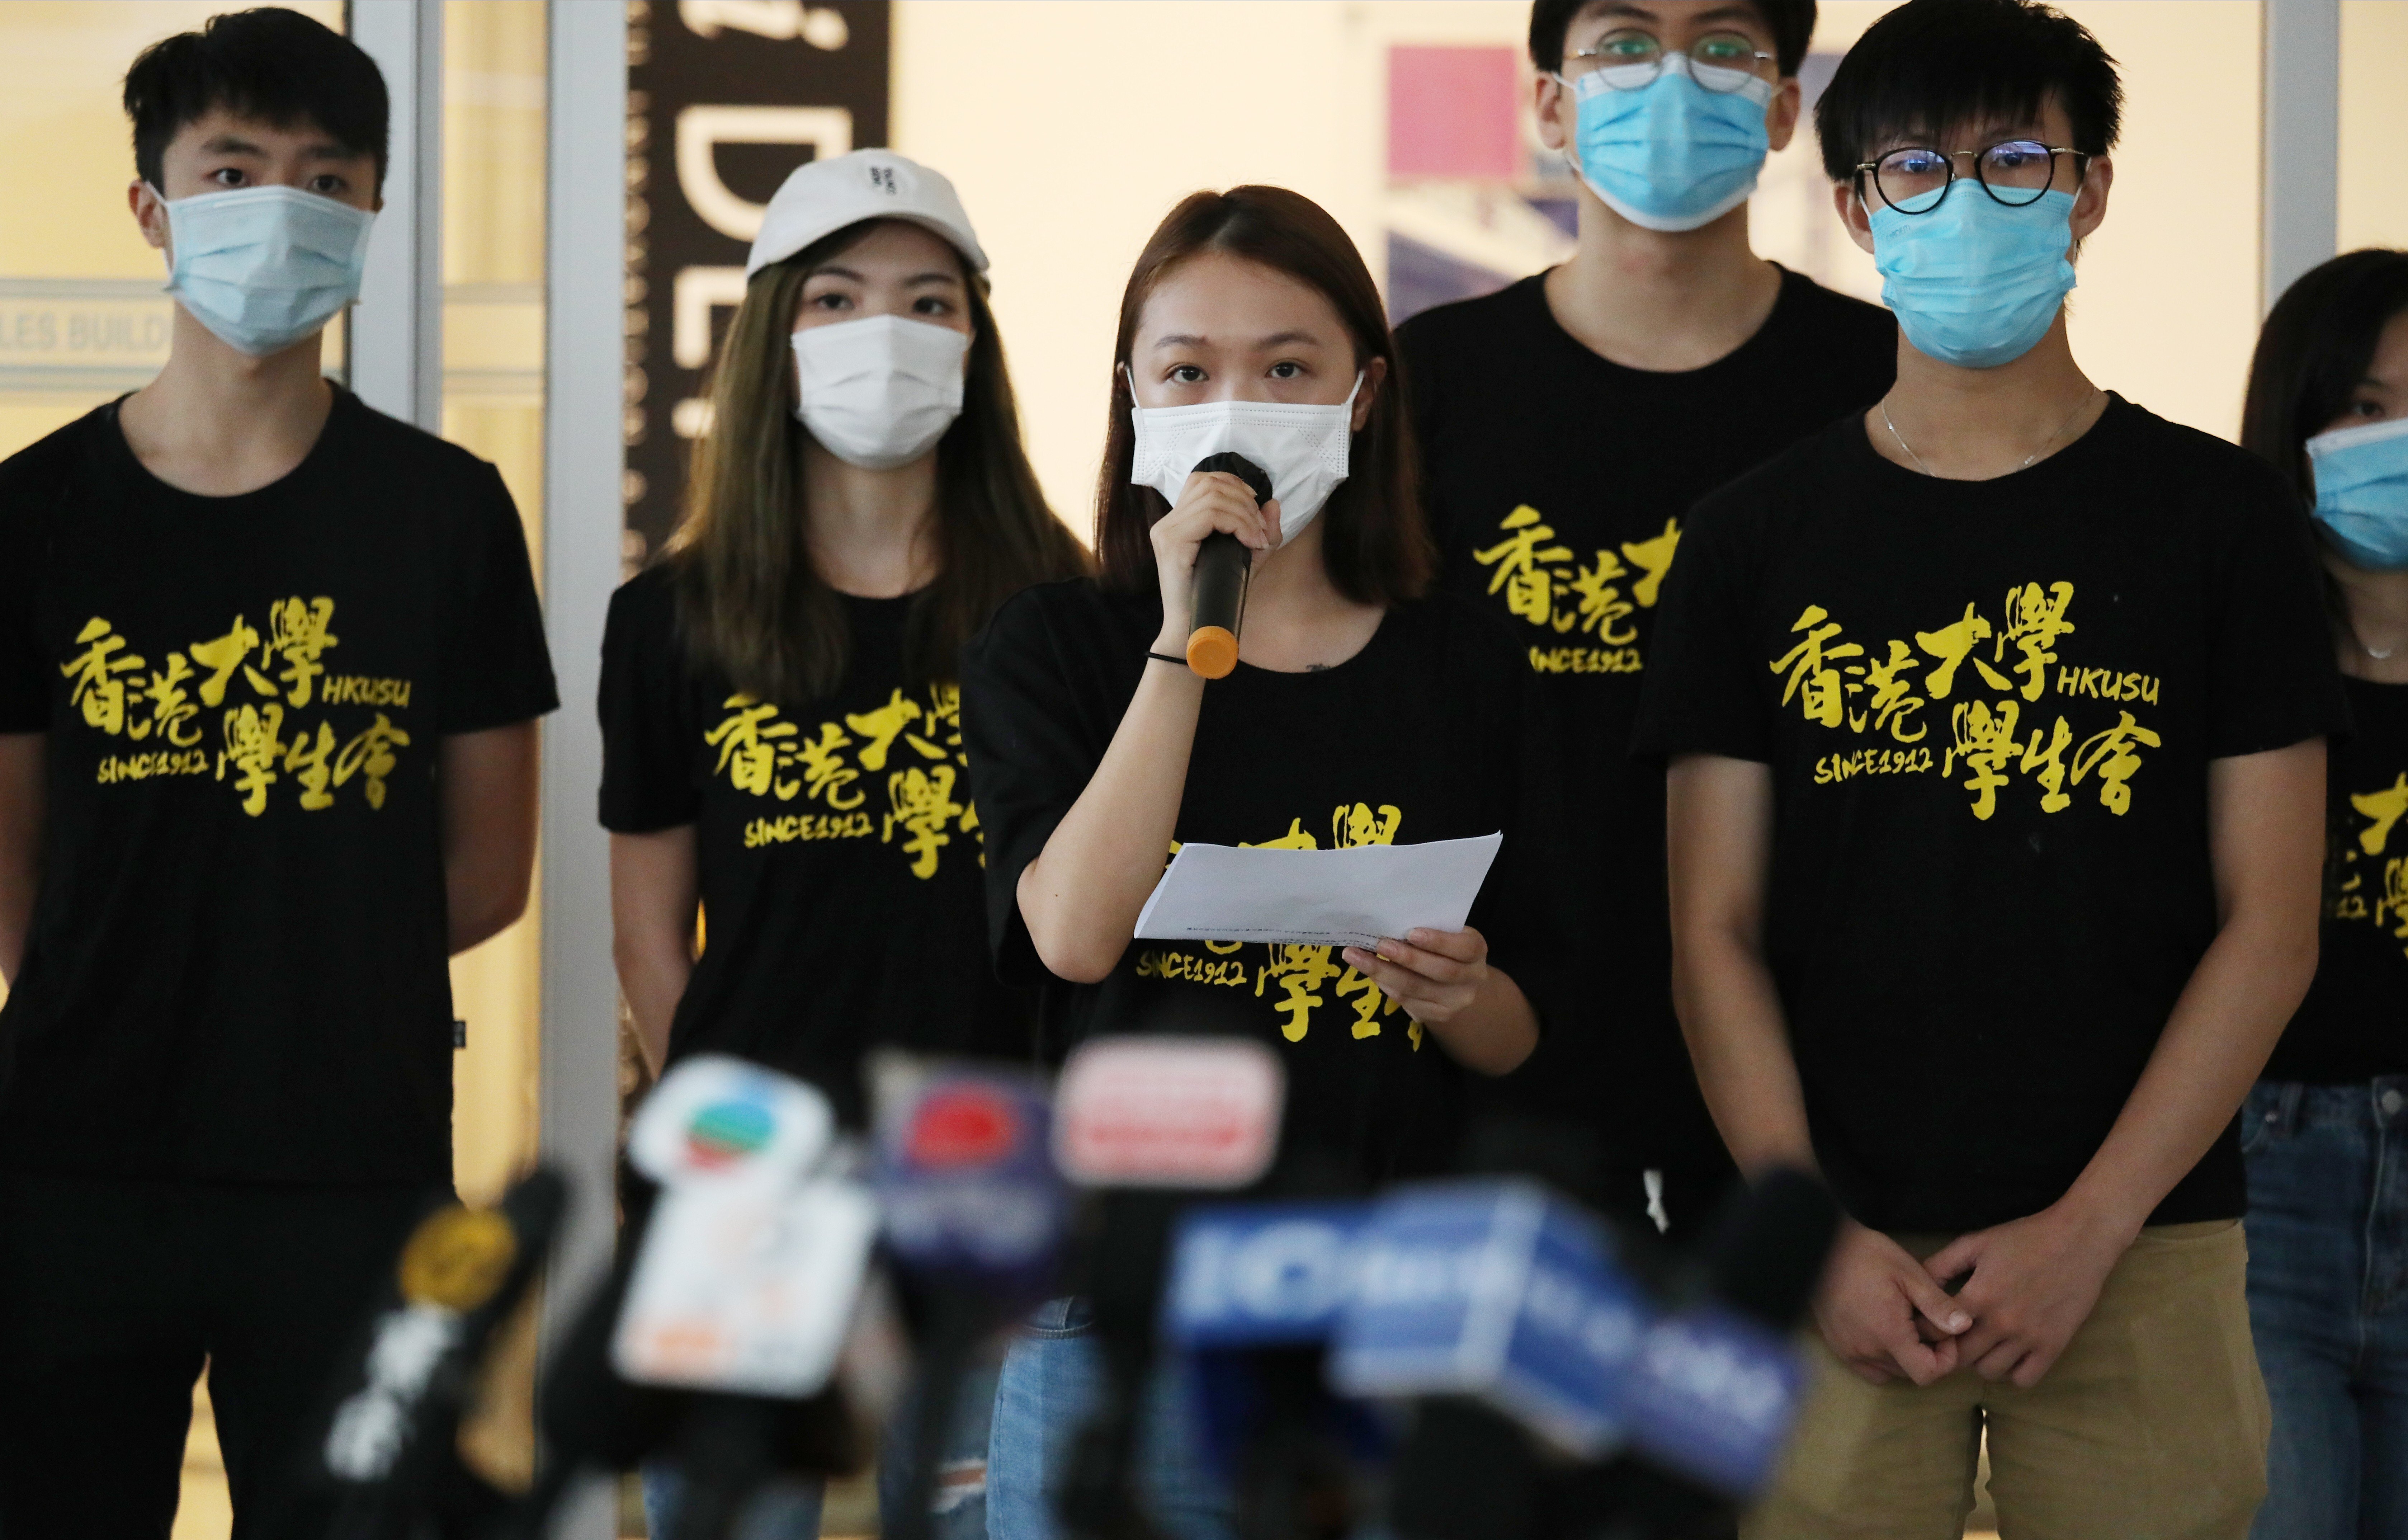 Representatives of HKU students meet the press as they submit a petition signed by more than 3,000 students and alumni demanding a review of Benny Tai’s dismissal, at the campus in Pok Fu Lam on August 3. Photo: Nora Tam